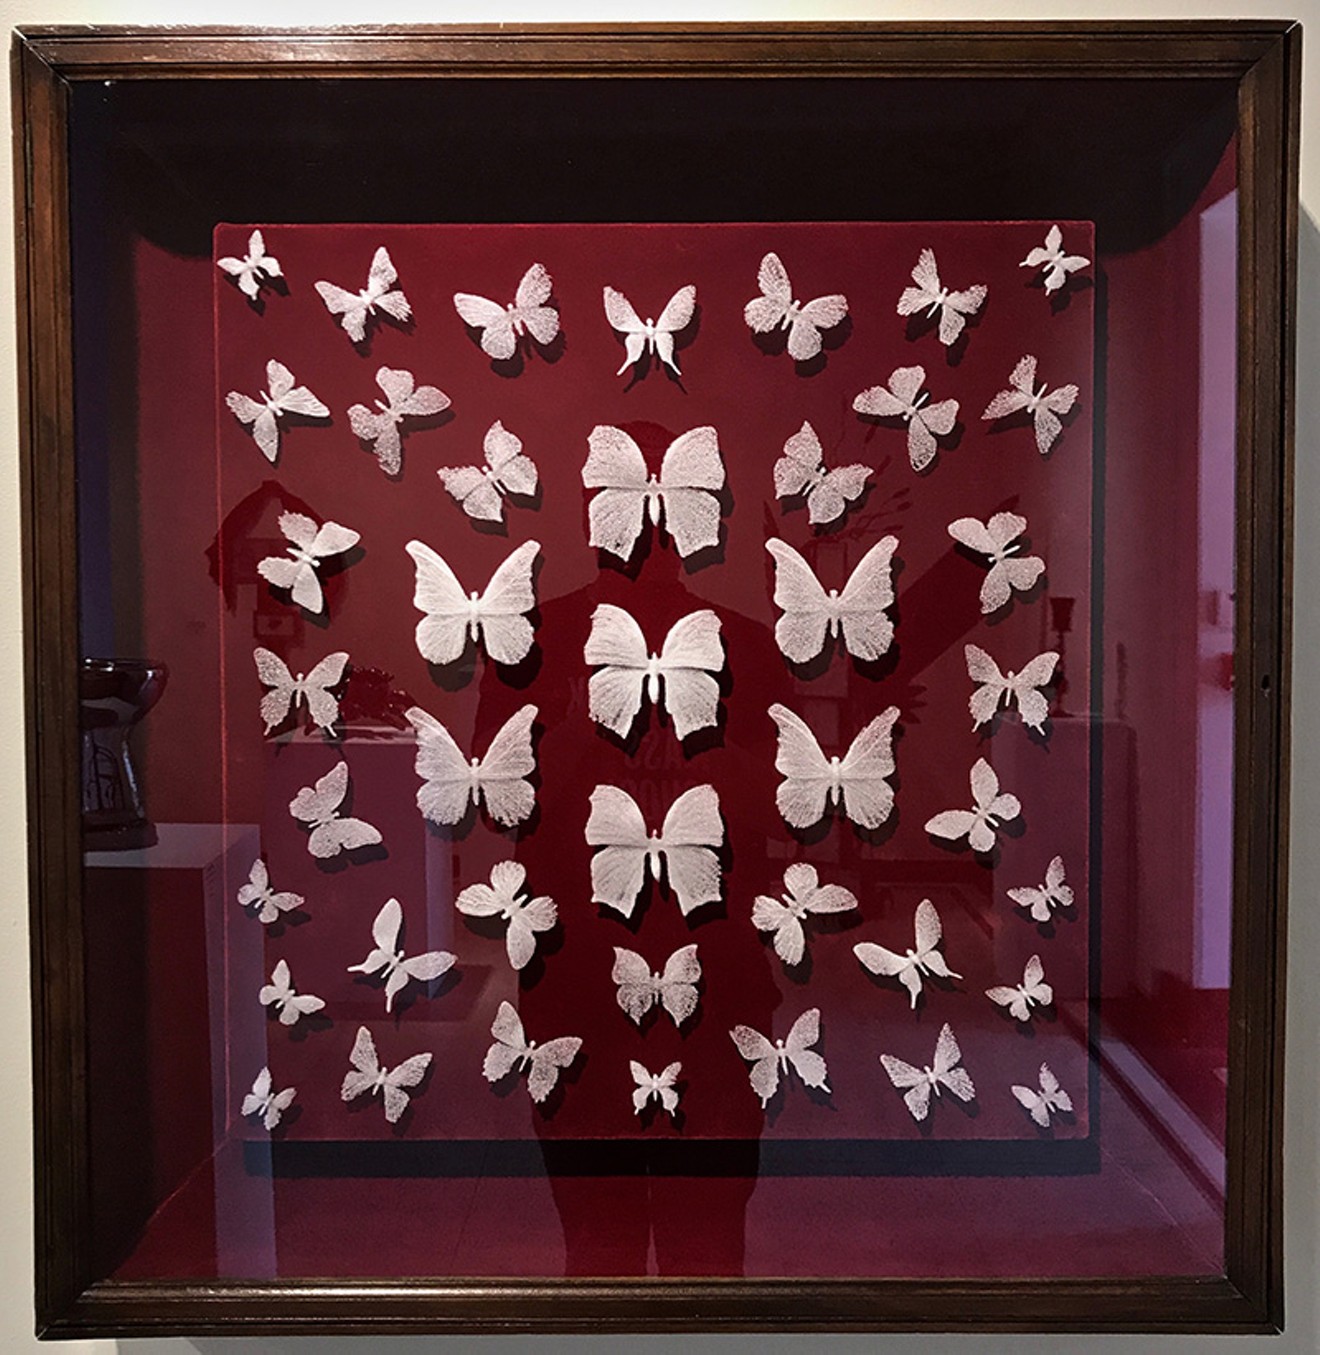 Michael Crowder's Pate Ver Butterflys is on display in the “Texas Contemporary Glass Exhibition”